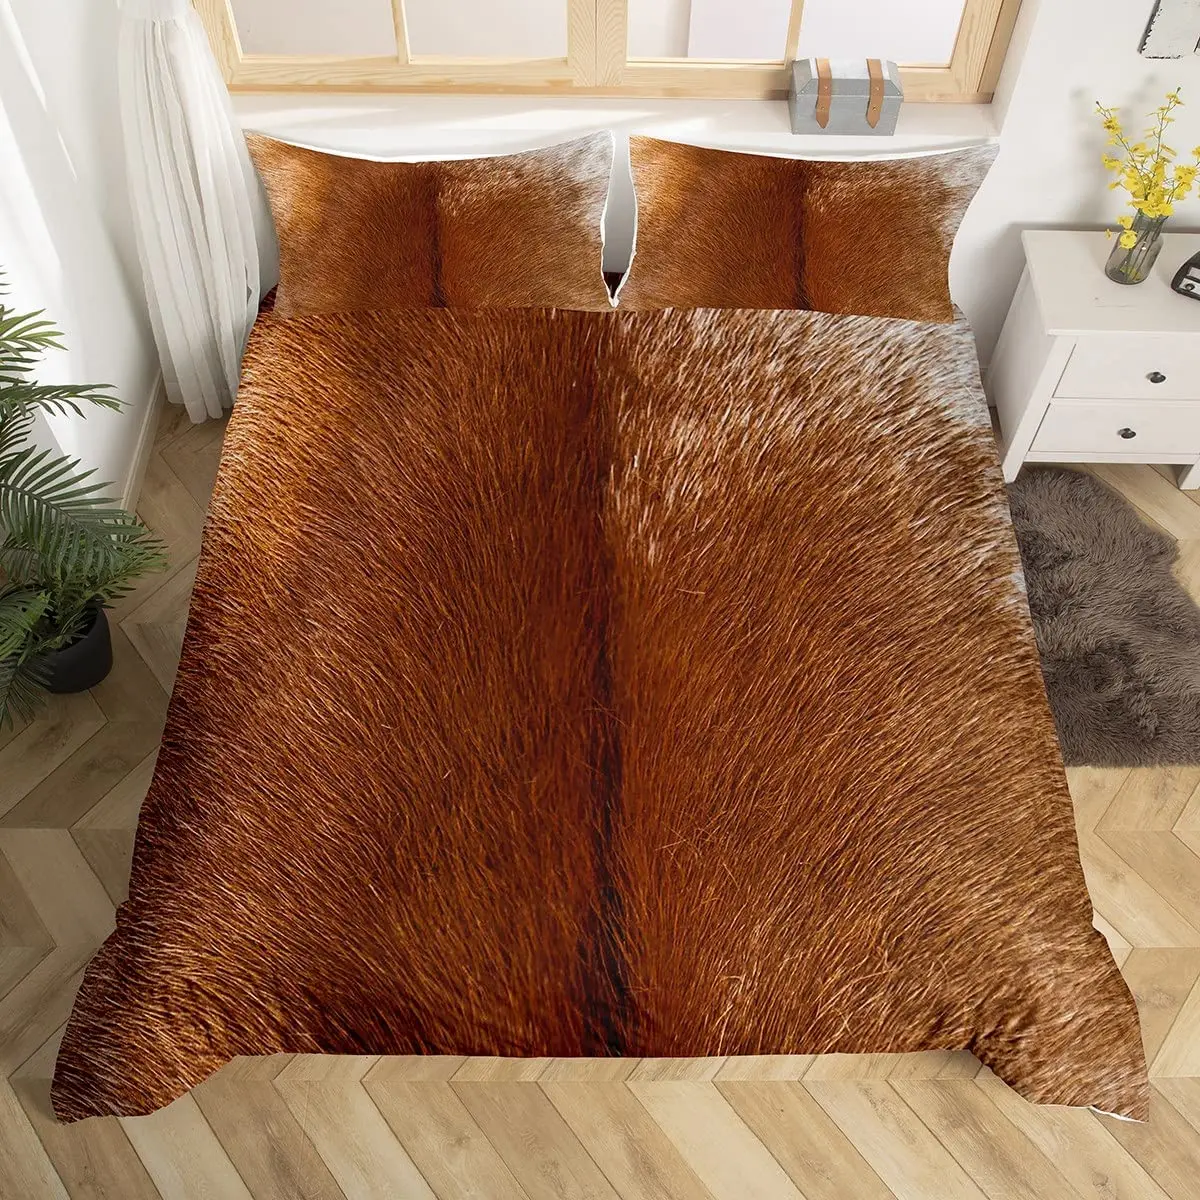 Brown Cowhide Pattern Duvet Cover Set Cow Print Bedding Set Farmhouse Animal Fur Hair Polyester Comforter Cover with Pillowcase